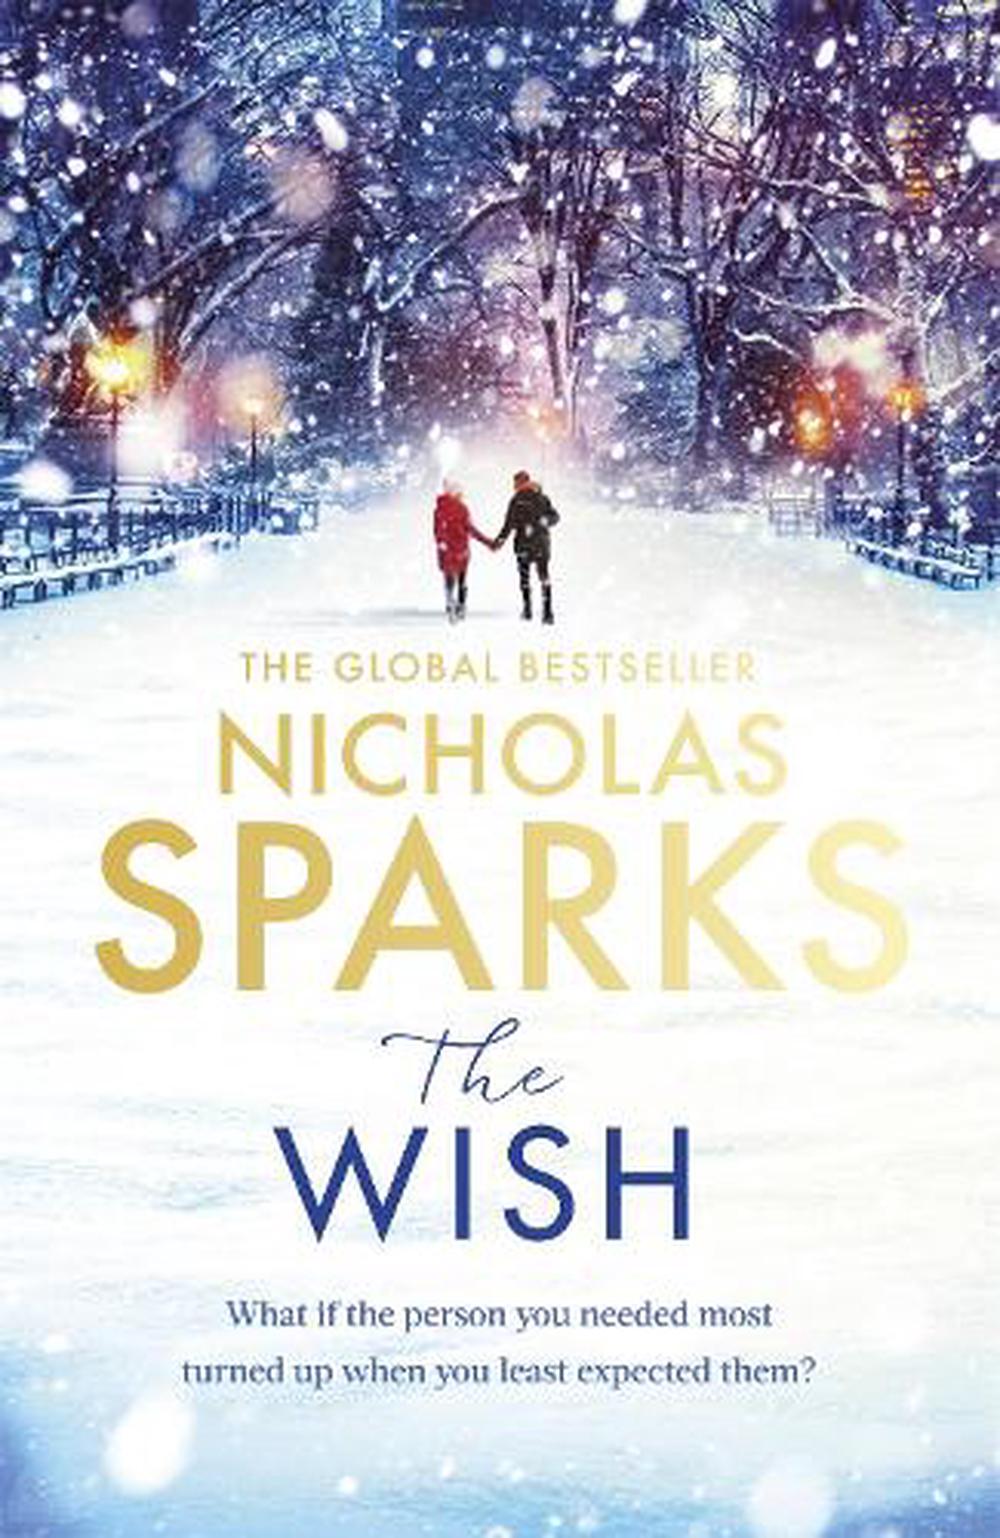 Wish by Nicholas Sparks, Hardcover, 9780751567861 Buy online at The Nile